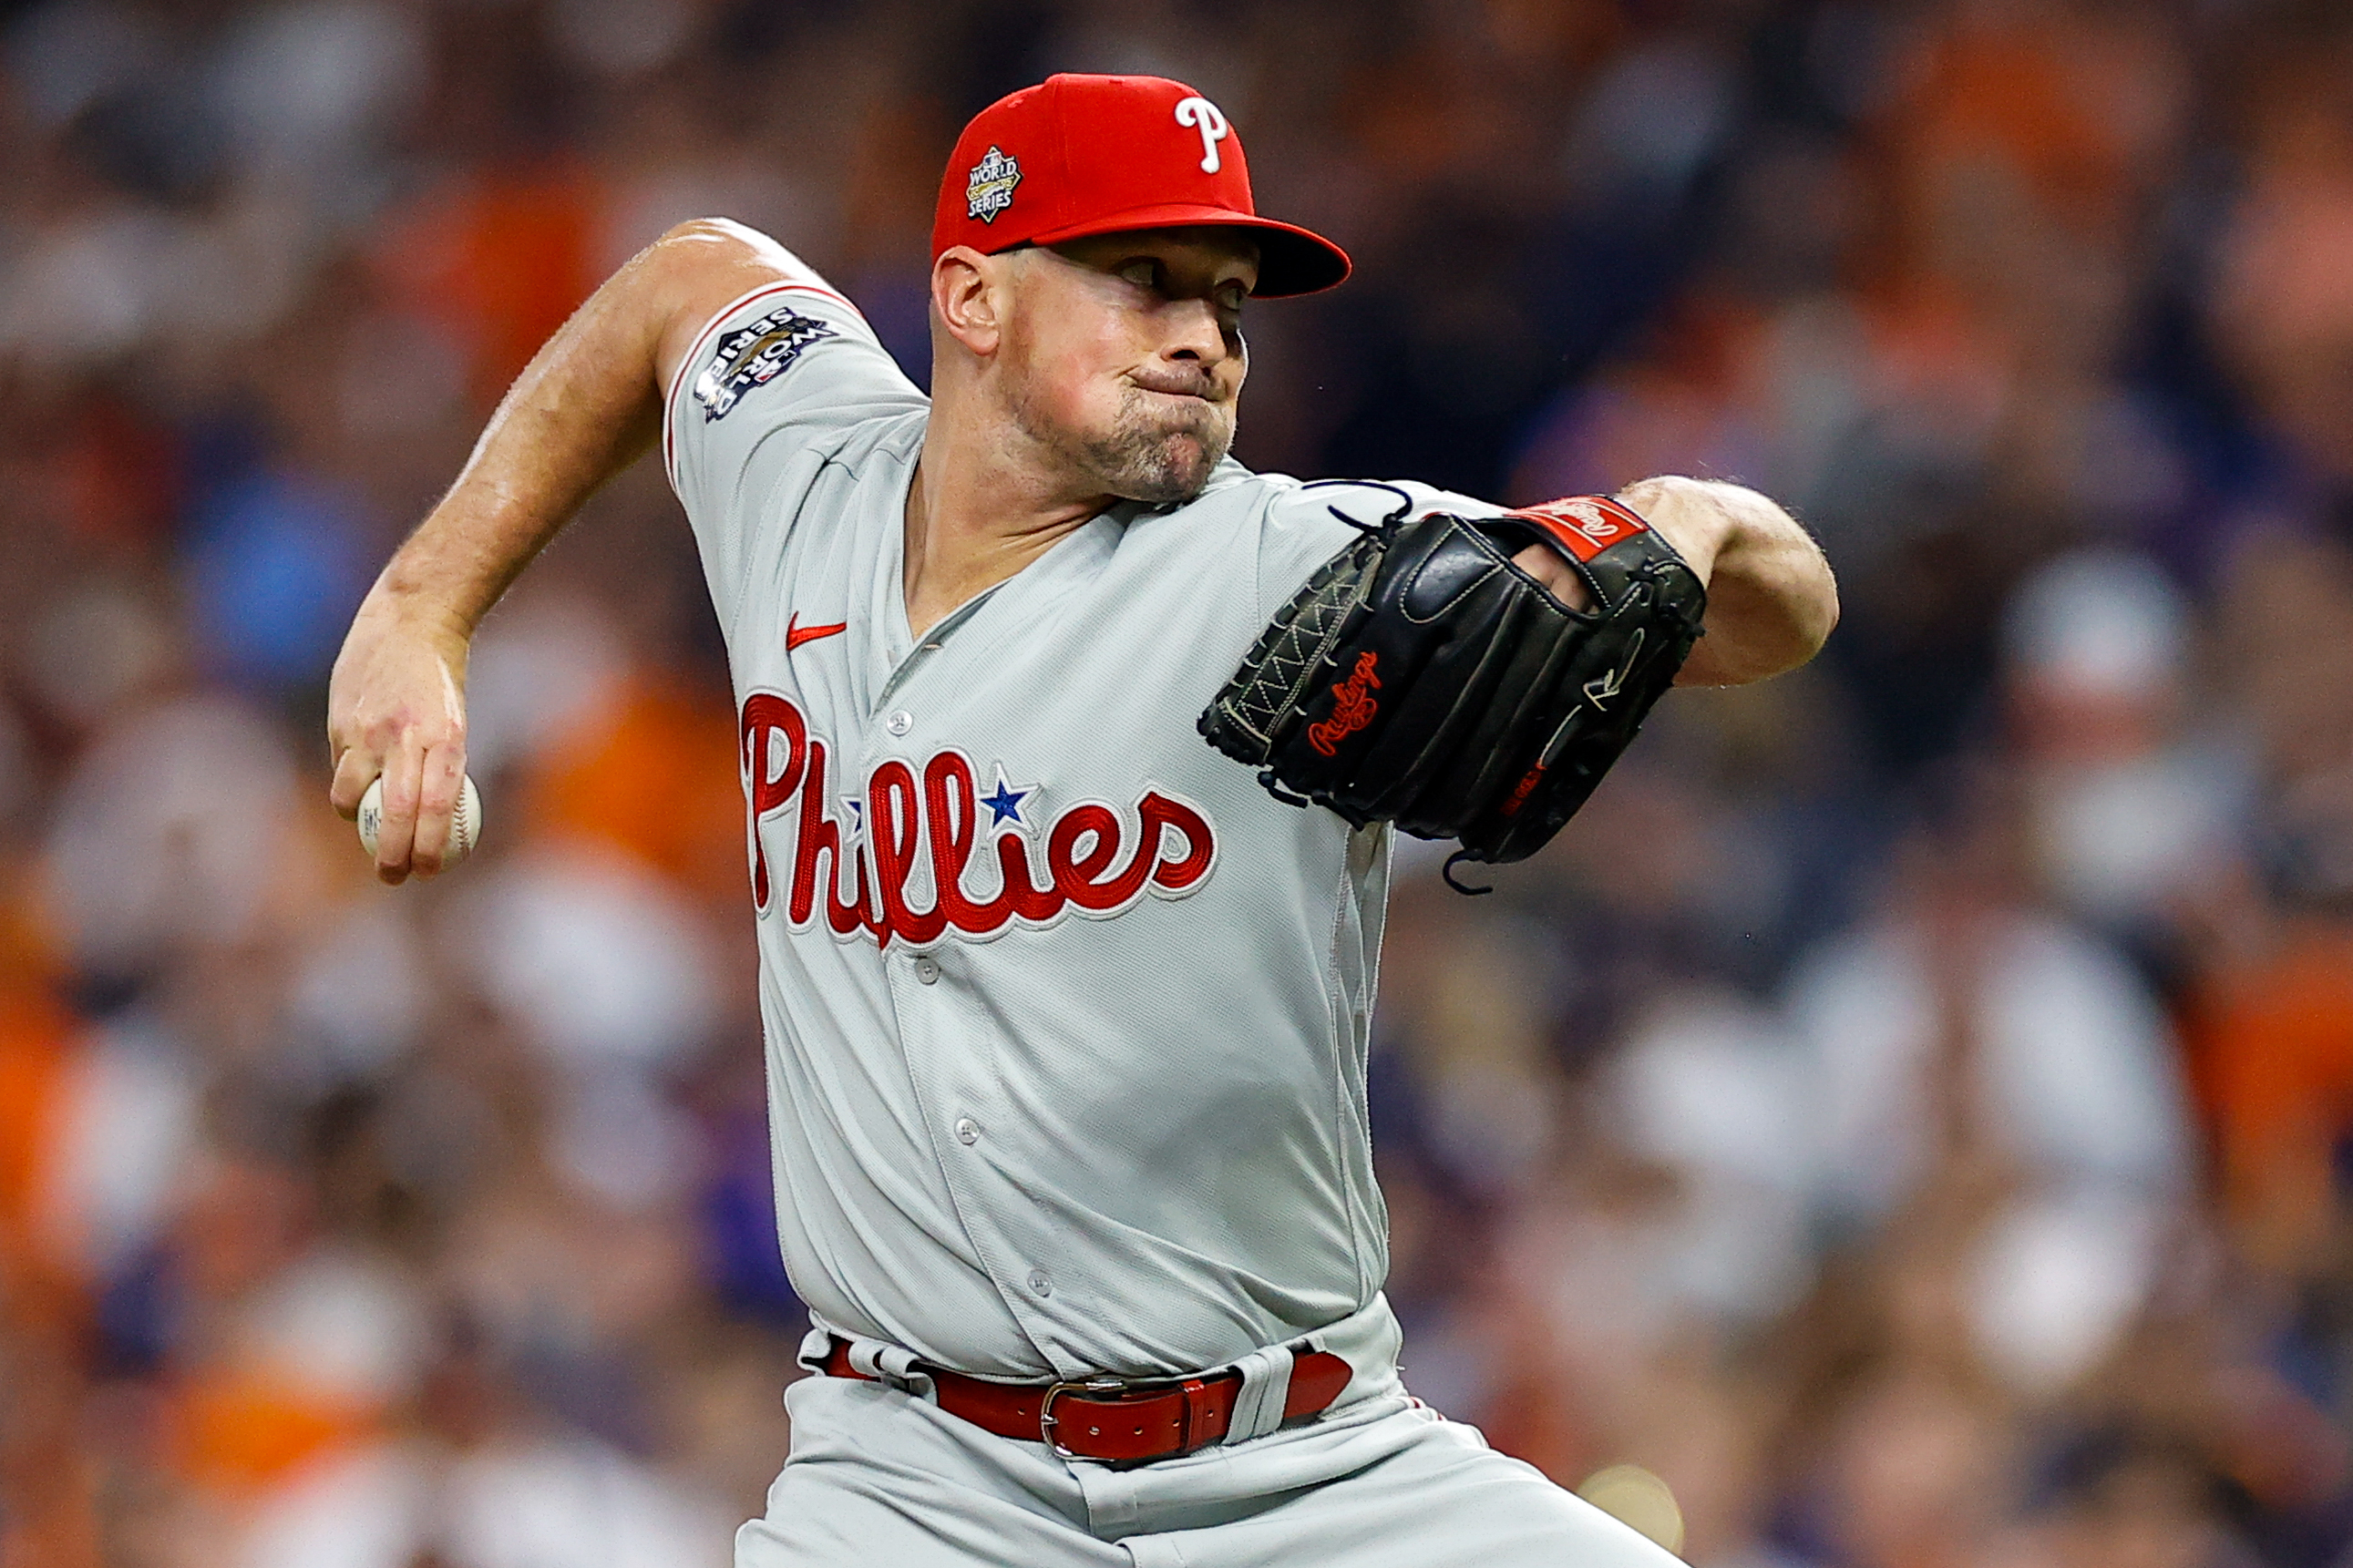 Phillies on Astros pitcher Framber Valdez, and how a sticky